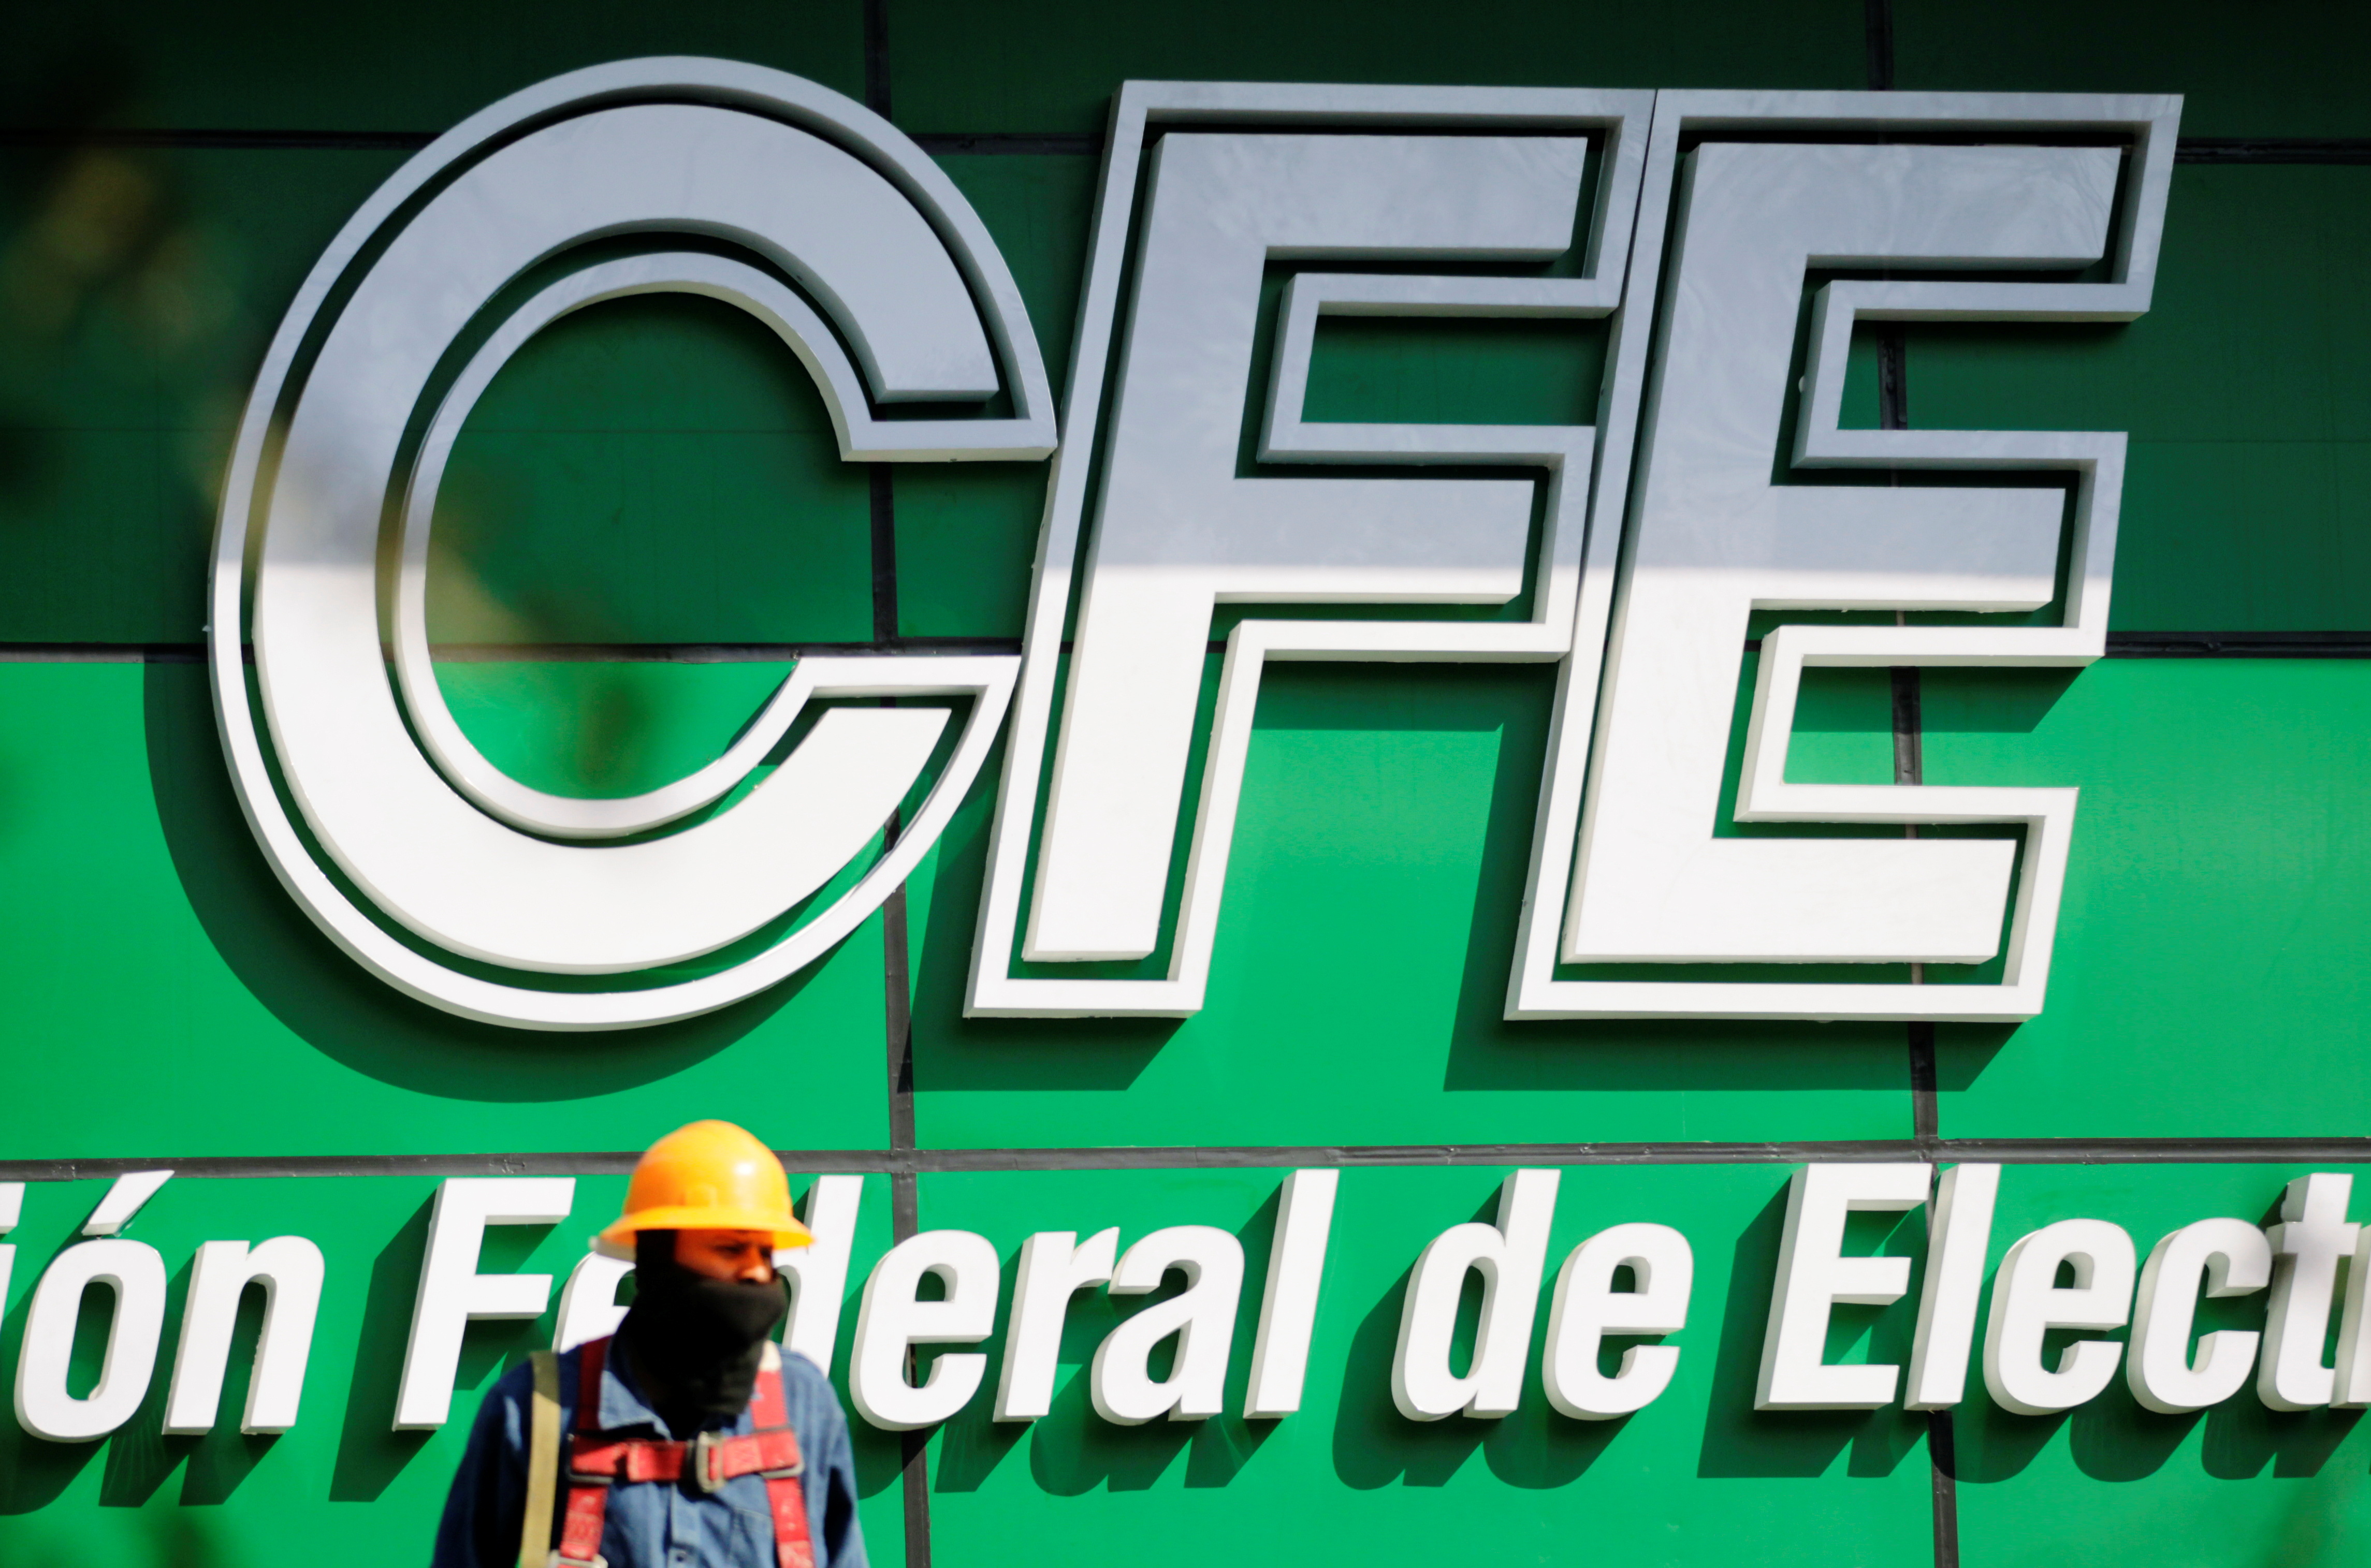 The logo of Mexico's state-run electric utility known as the Federal Electricity Commission (CFE), is pictured at its building office in Monterrey, Mexico February 9, 2021. REUTERS/Daniel Becerril